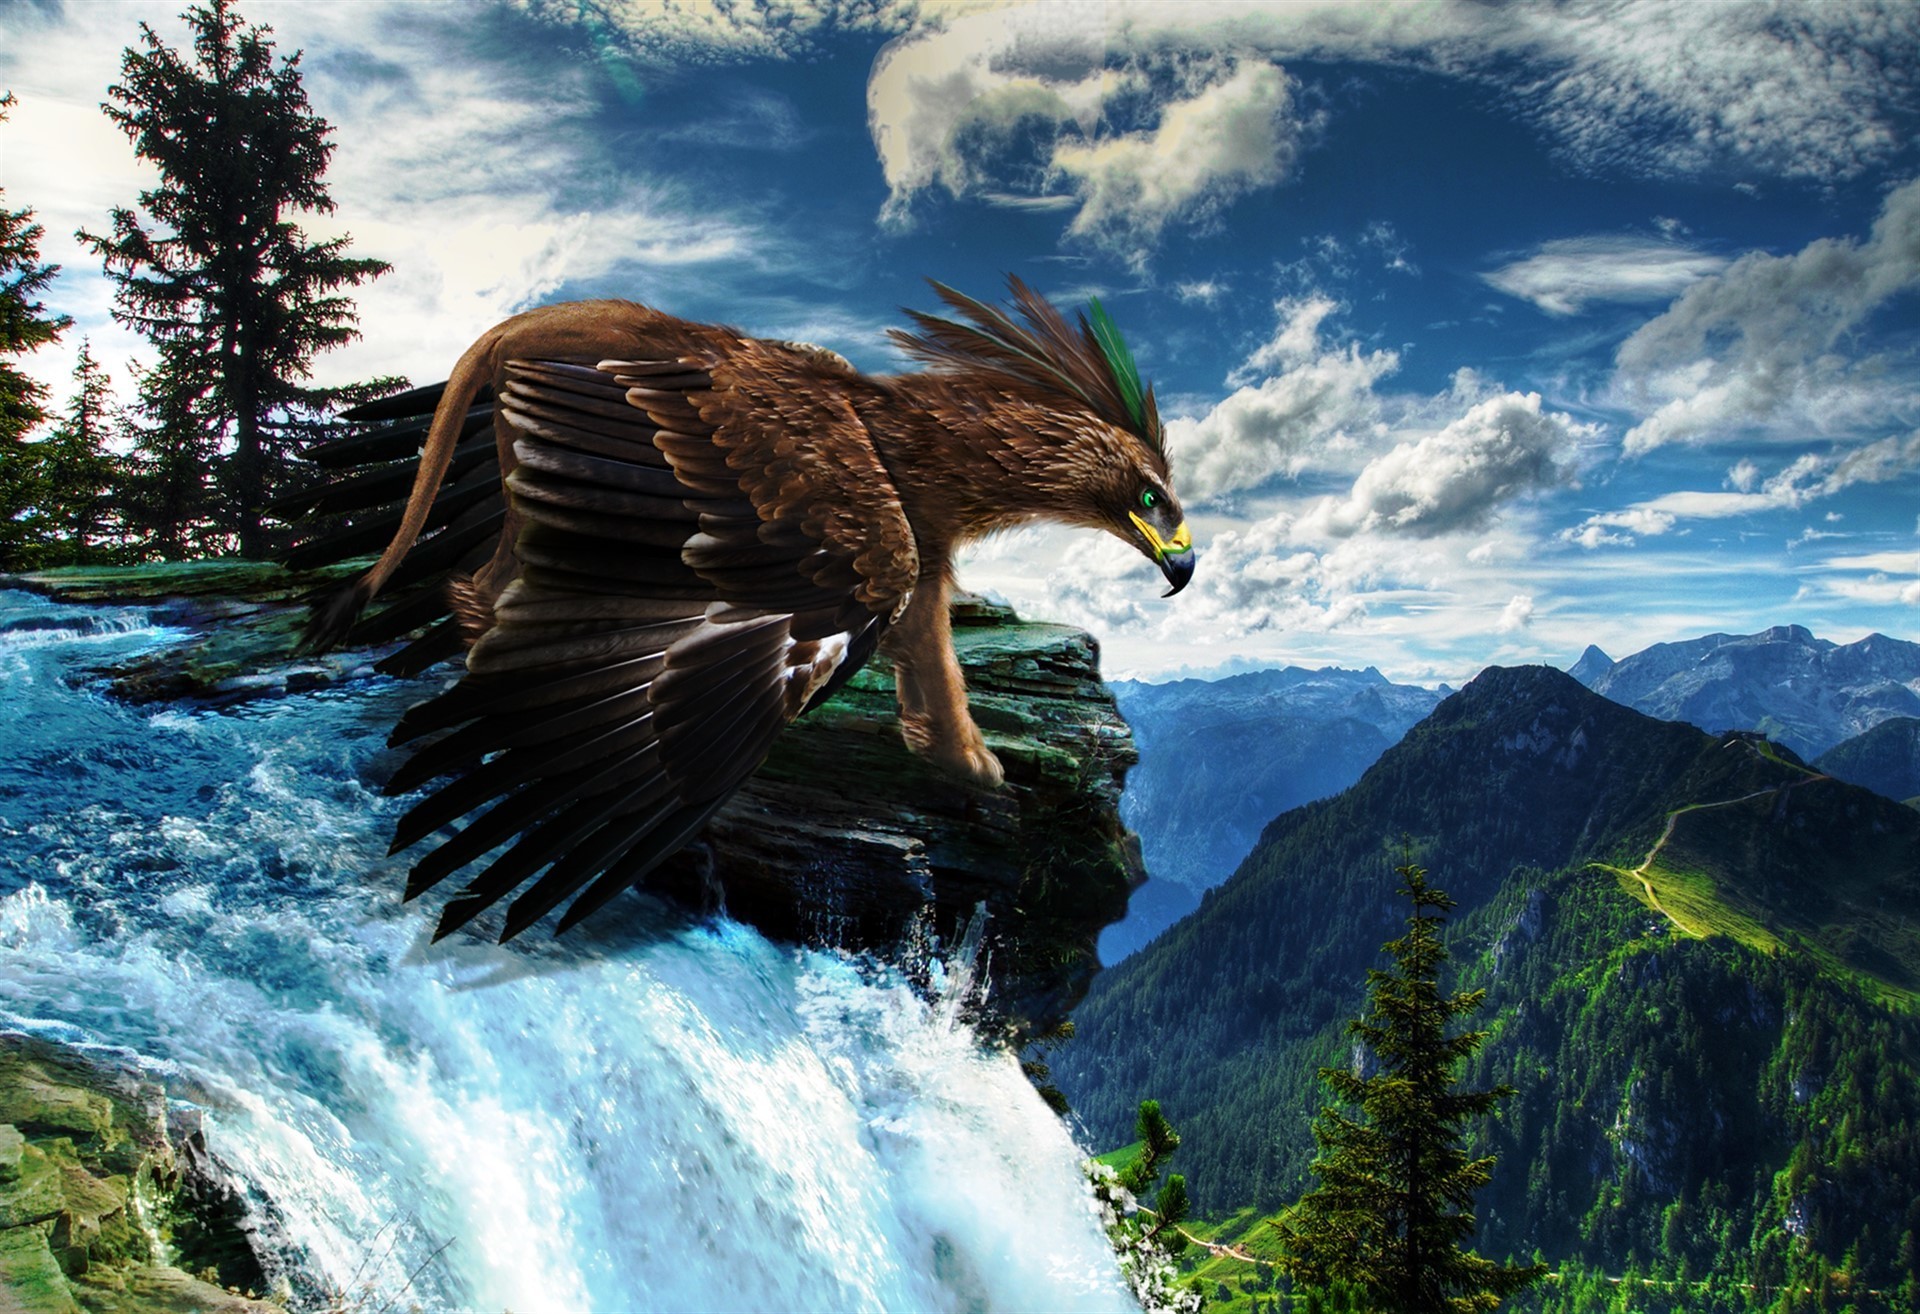 magical, Animals, Scenery, Waterfall, Gryphon, Eagle, Landscape, Mountain, Sky, Clouds, River Wallpaper